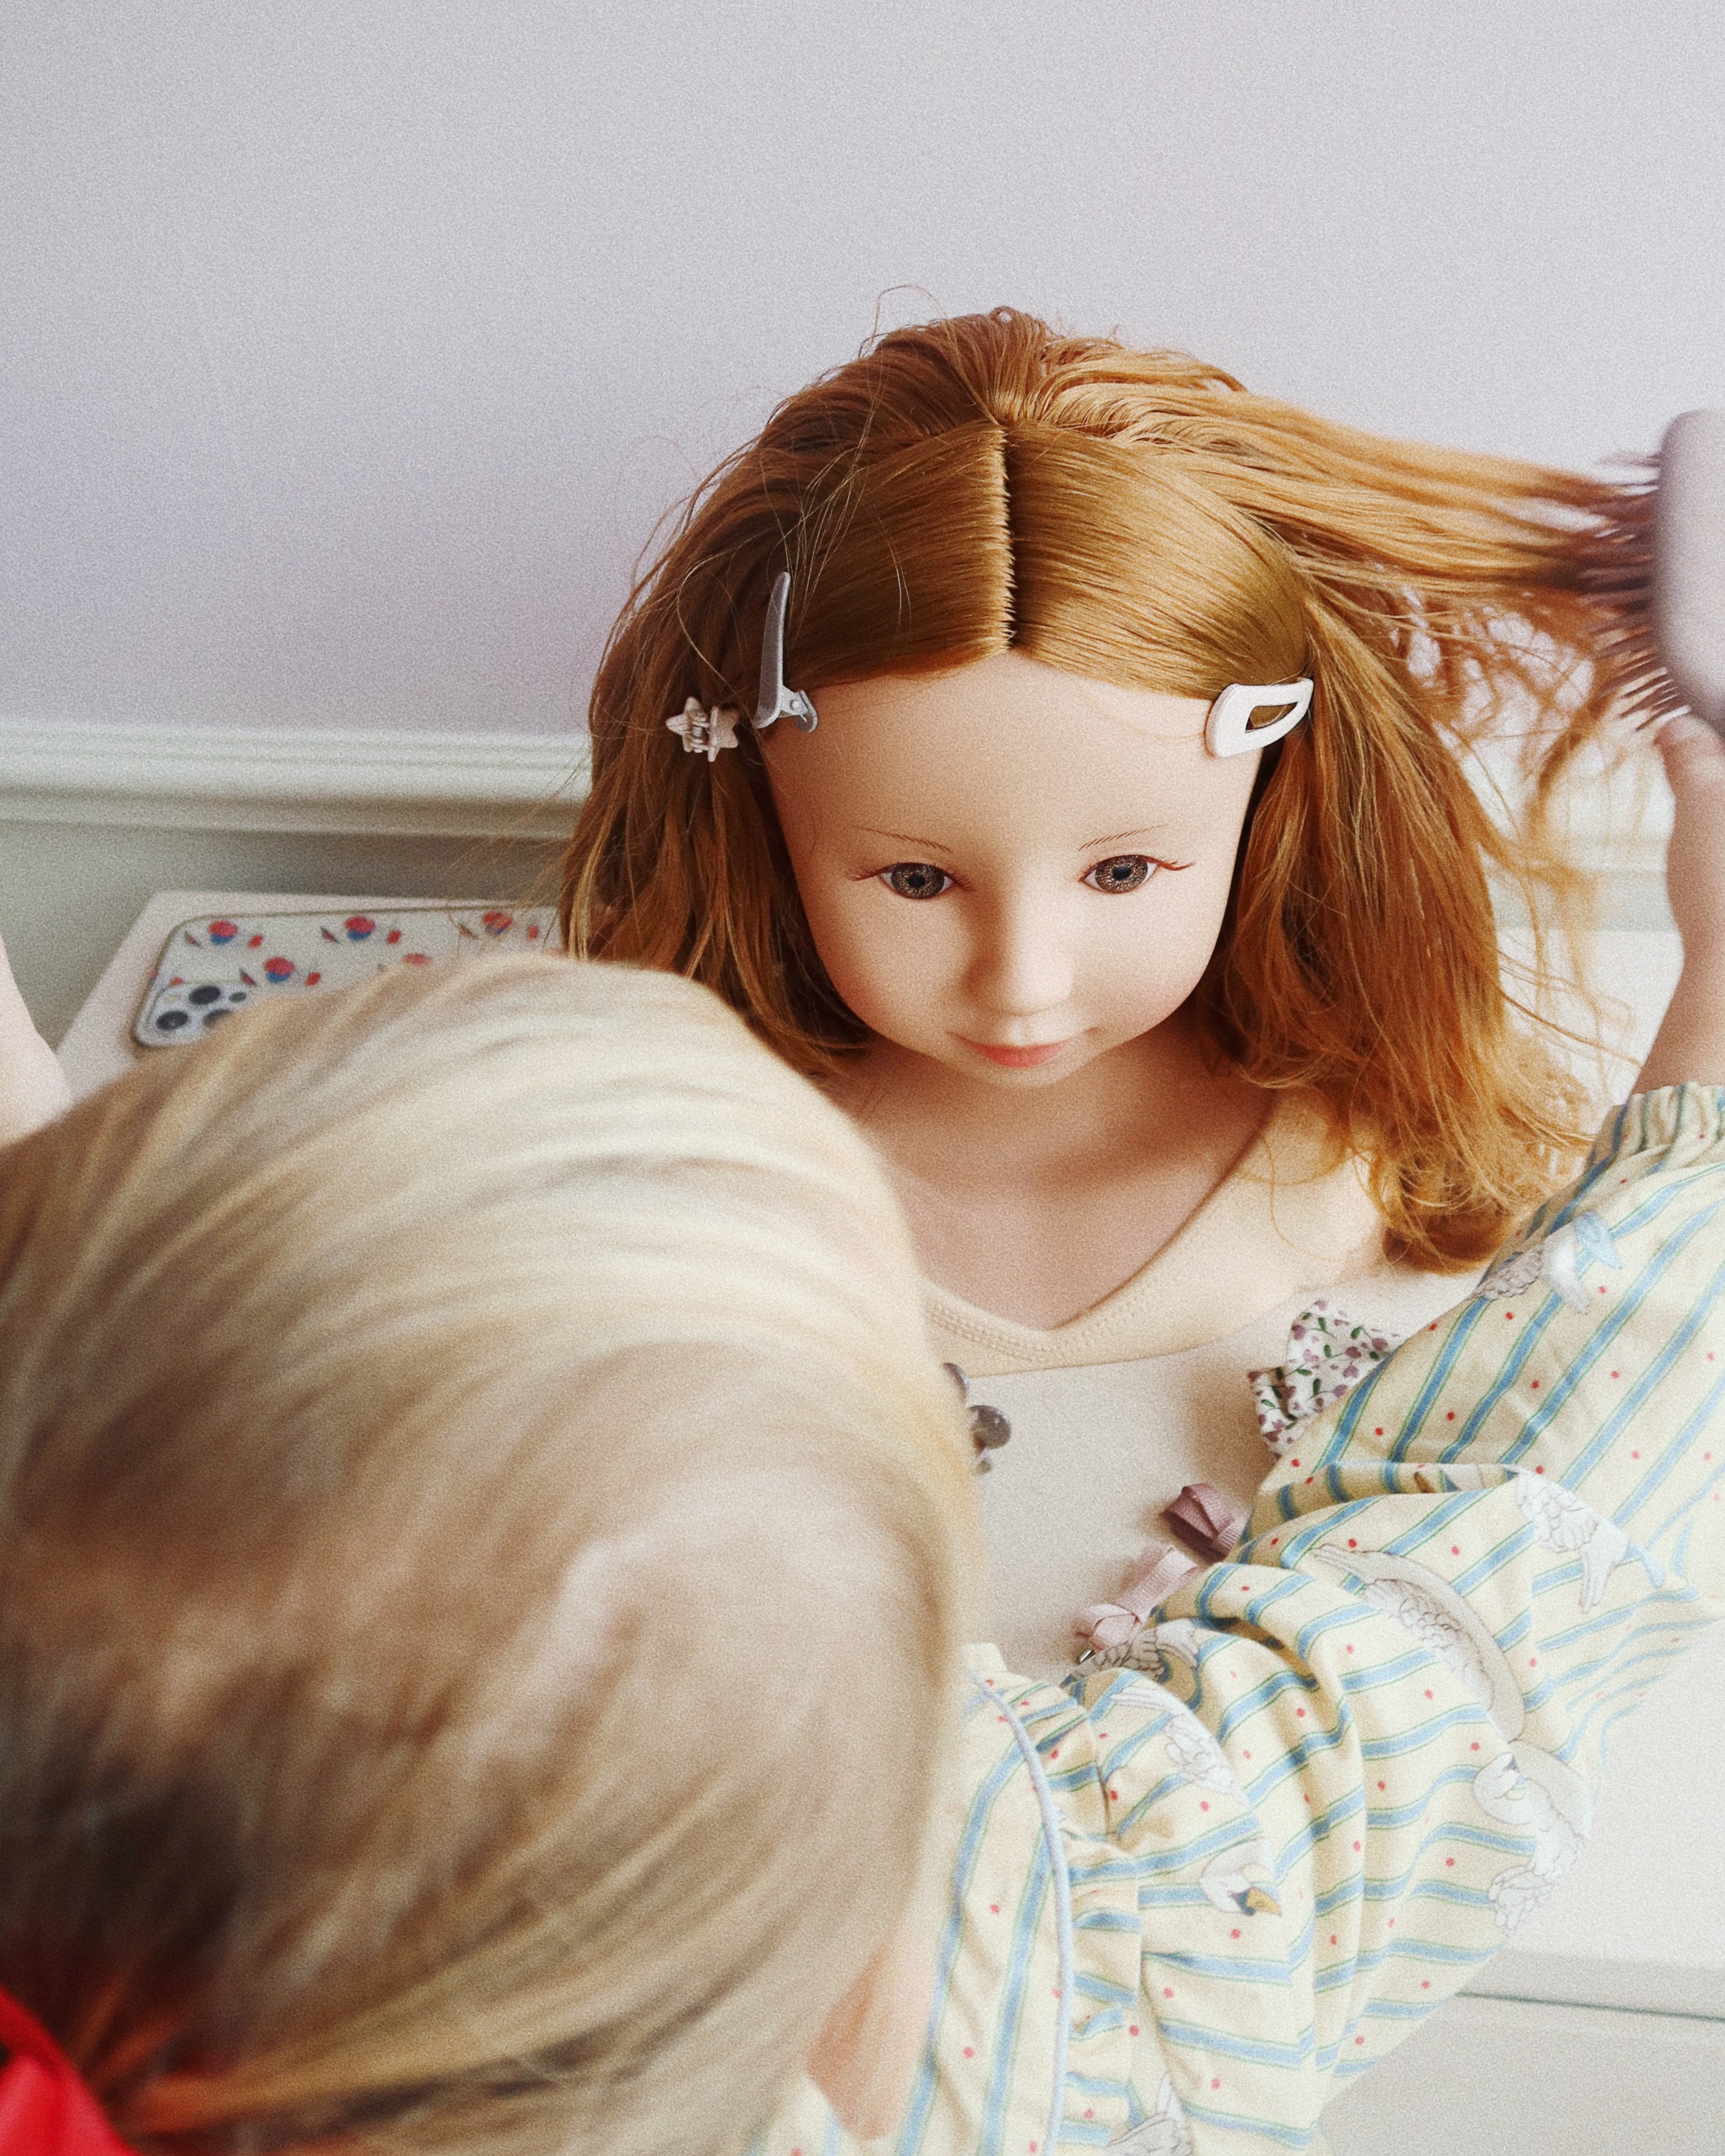 Pretend Play Toys, Doll Hair Salon, Dolls, Dolls and Accessories